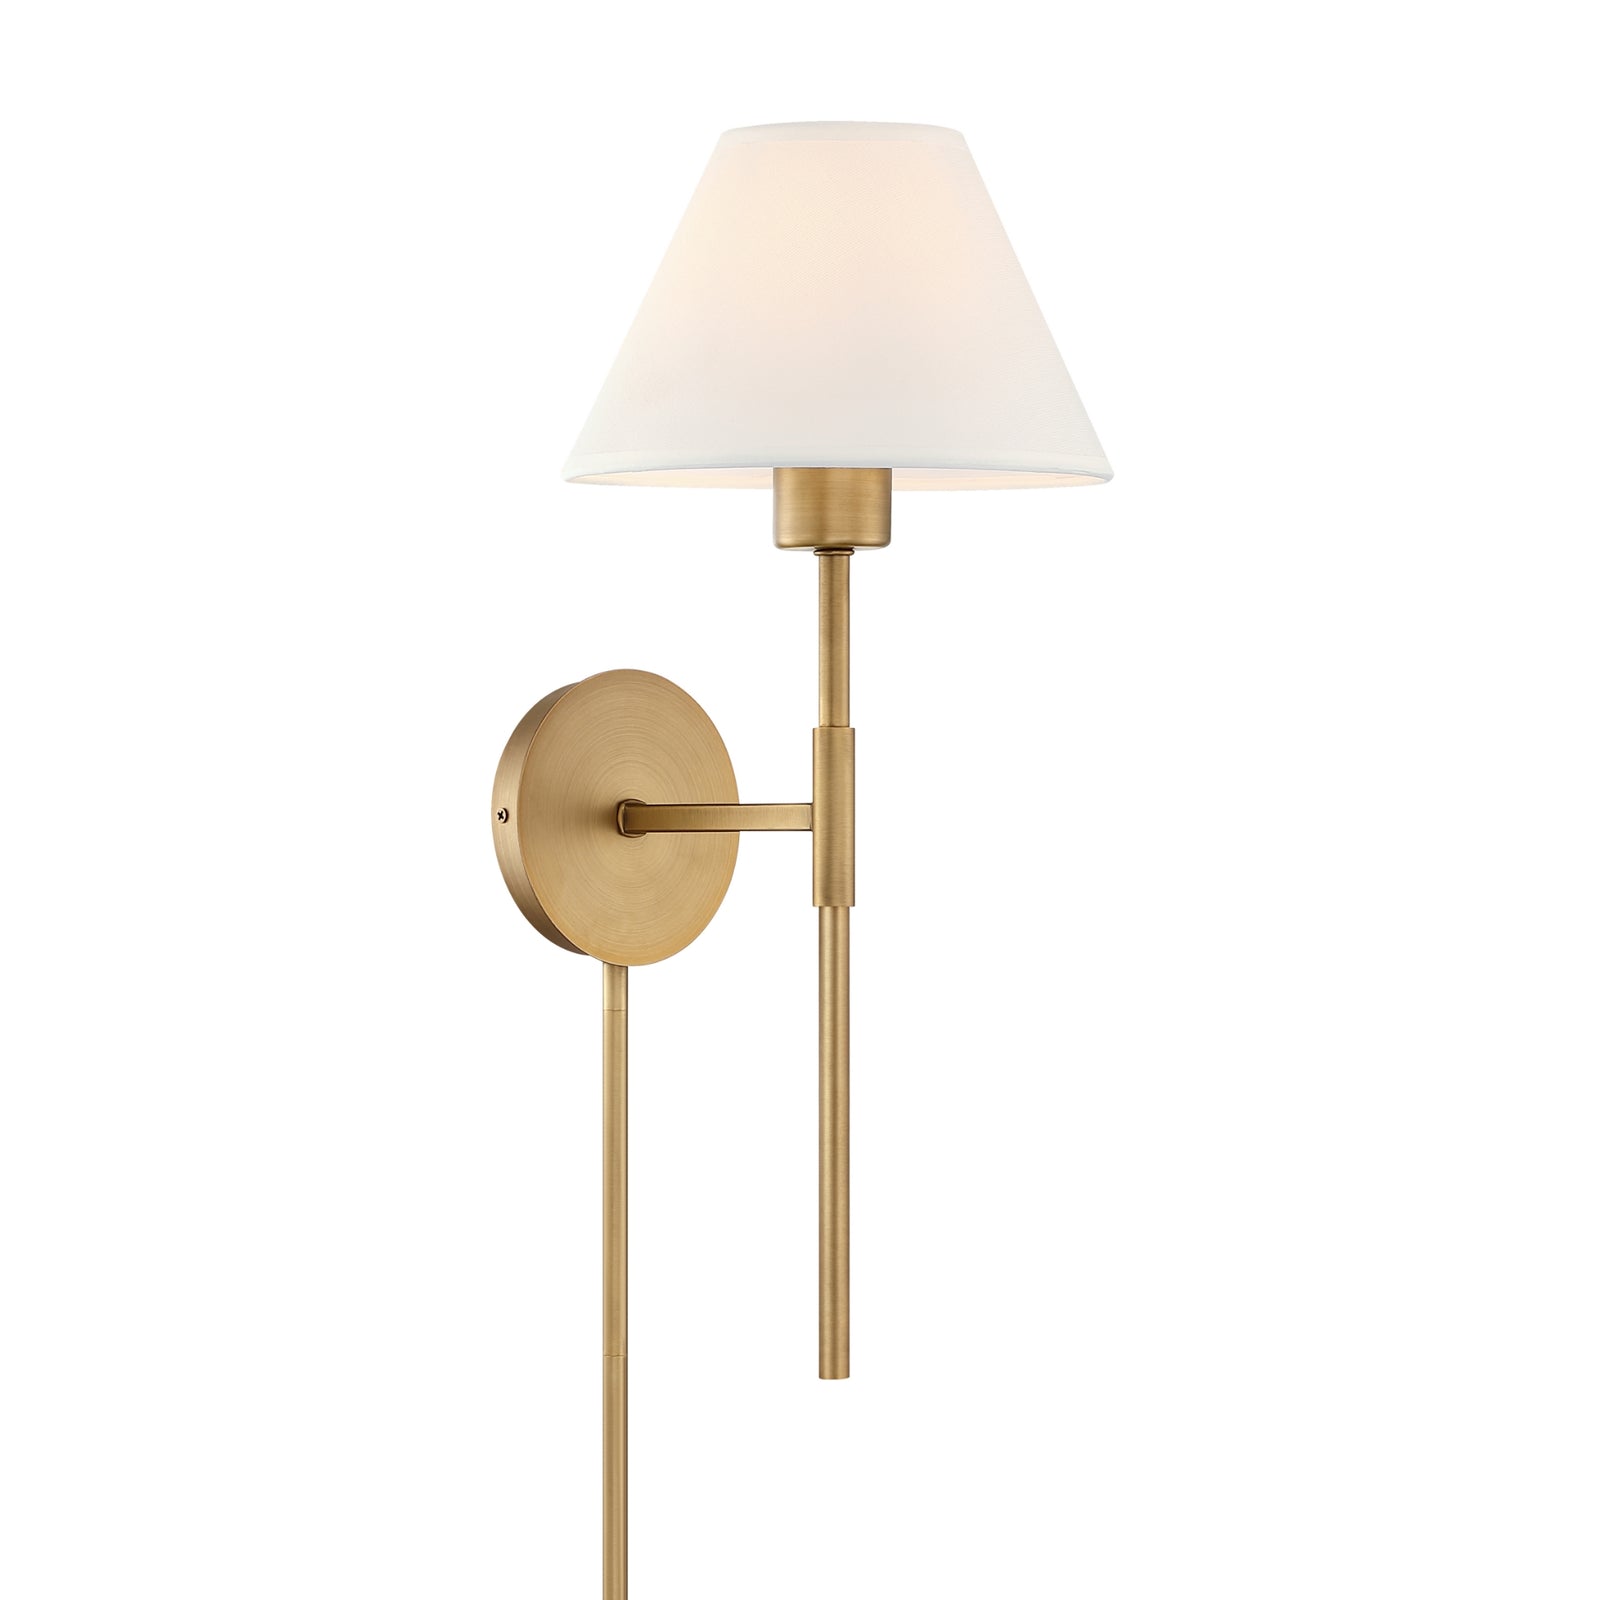 Bedside Modern Reading Wall Mounted Lamp Plug In Sconce | Nathan James